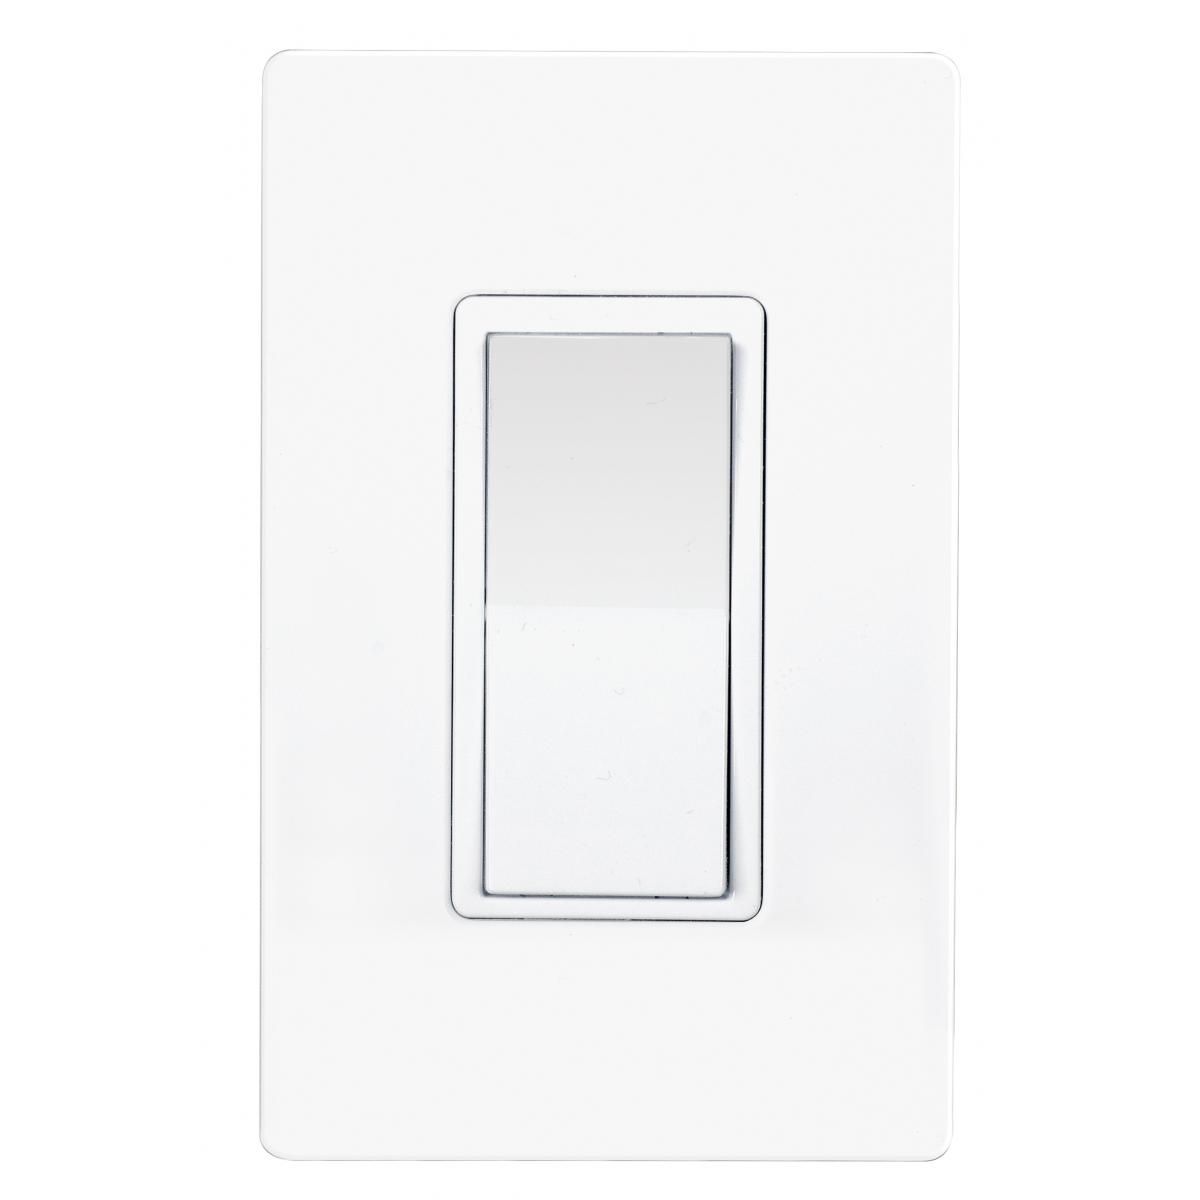 86-102 ZWAVE IN WALL LIGHT SWITCH